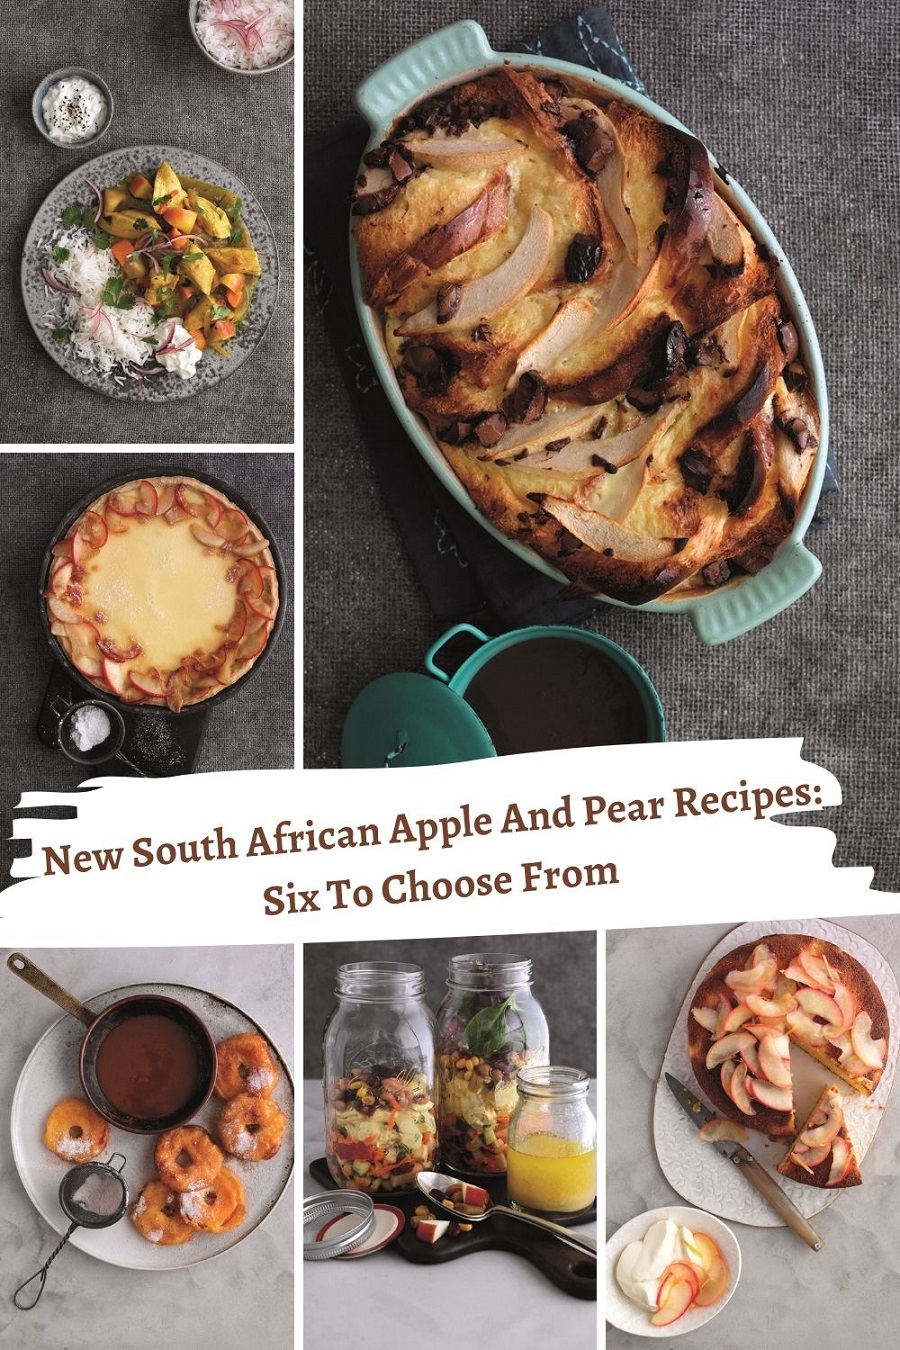 New South African Apple And Pear Recipes: Six To Choose